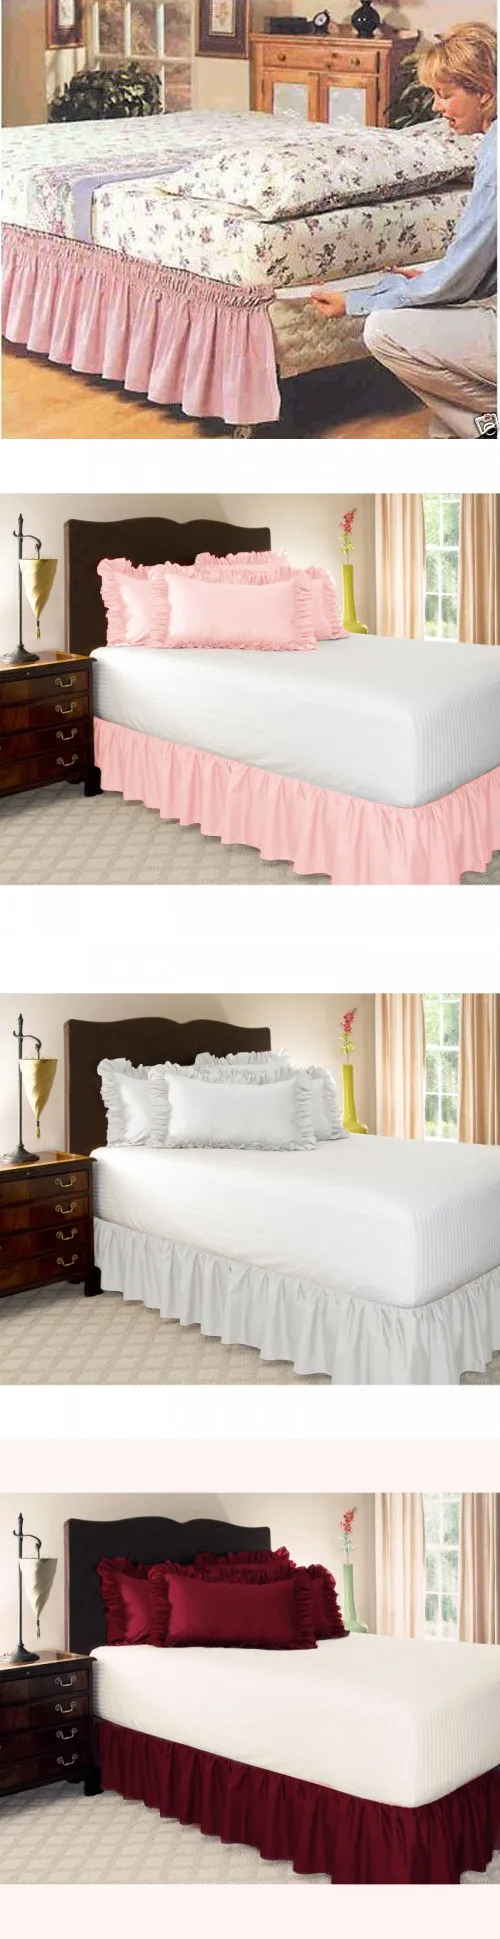 Wholesale Bed Skirt Elastic Solid color Bed skirts Bed Covers without Bed Surface Queen/King Dust Ruffle bedspread free shipping